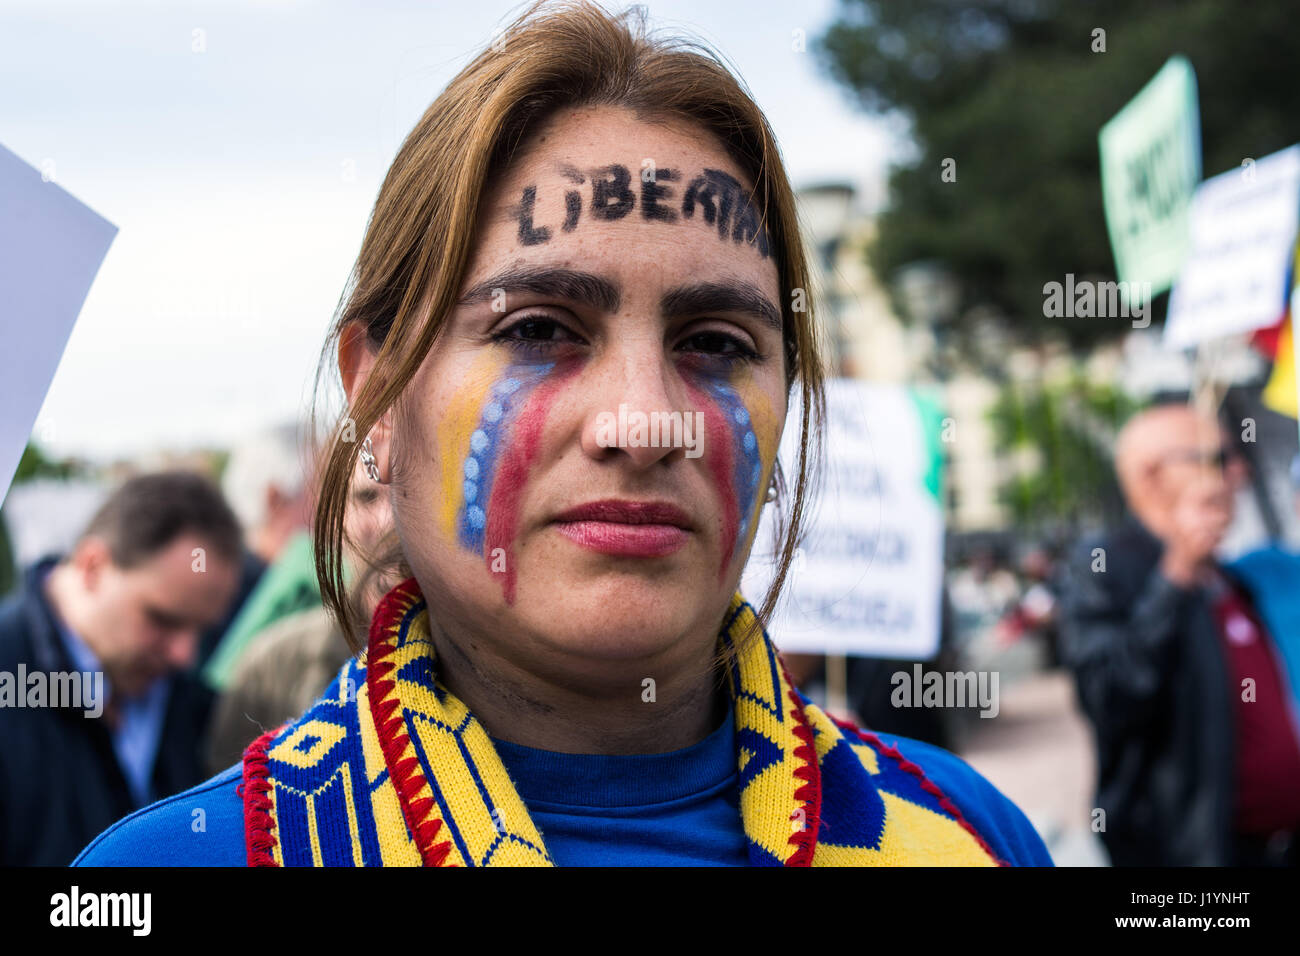 Madrid, Spain. 22nd April, 2017. Venezuelan woman with her face painted, protesting the current situation of their country in Madrid, Spain. Credit: Marcos del Mazo/Alamy Live News Stock Photo